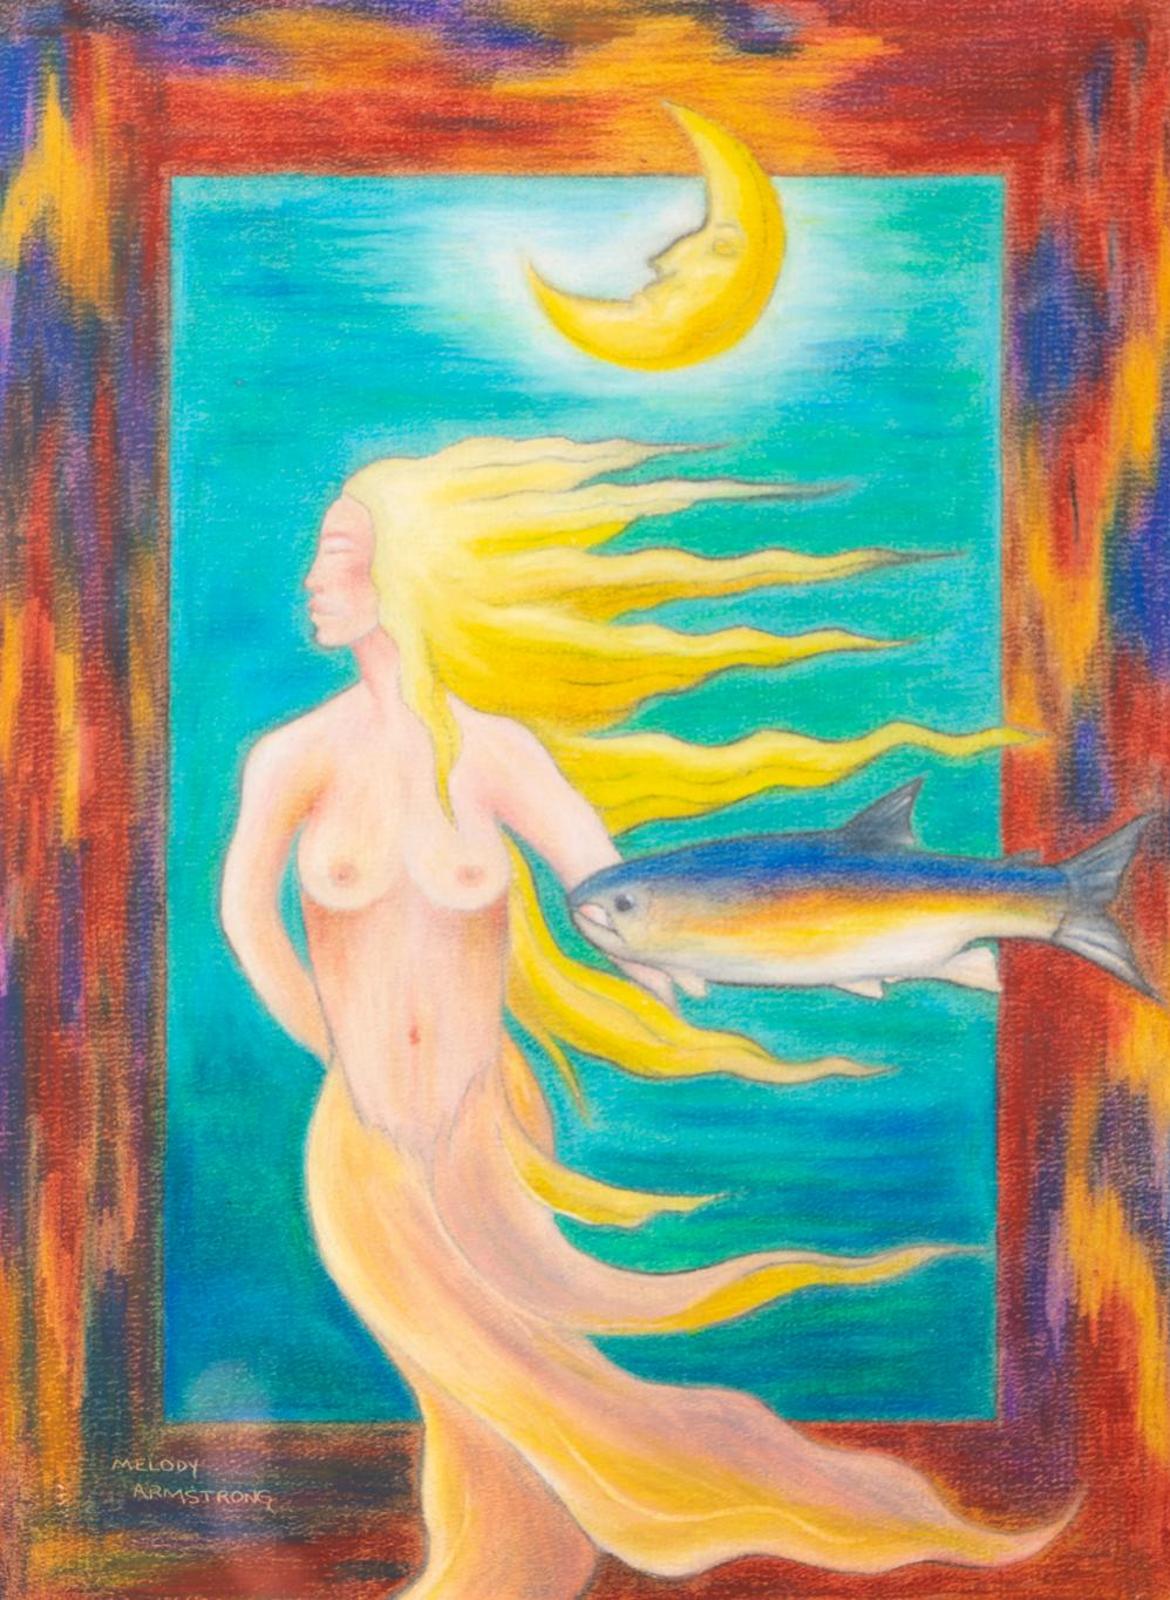 Melody Armstrong (1965) - Untitled - Woman, Moon and Fish